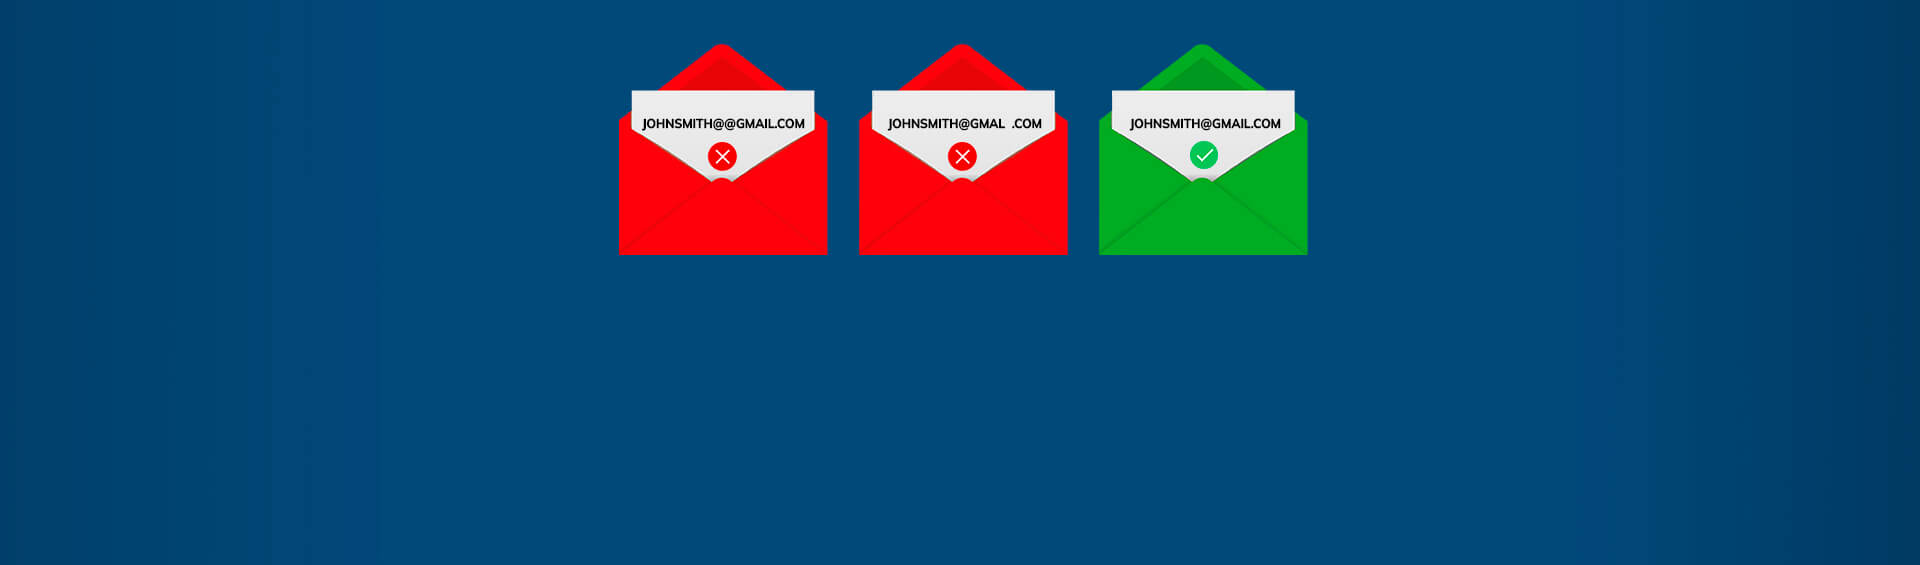 How to Validate Your Email Address Database: A Definitive Guide